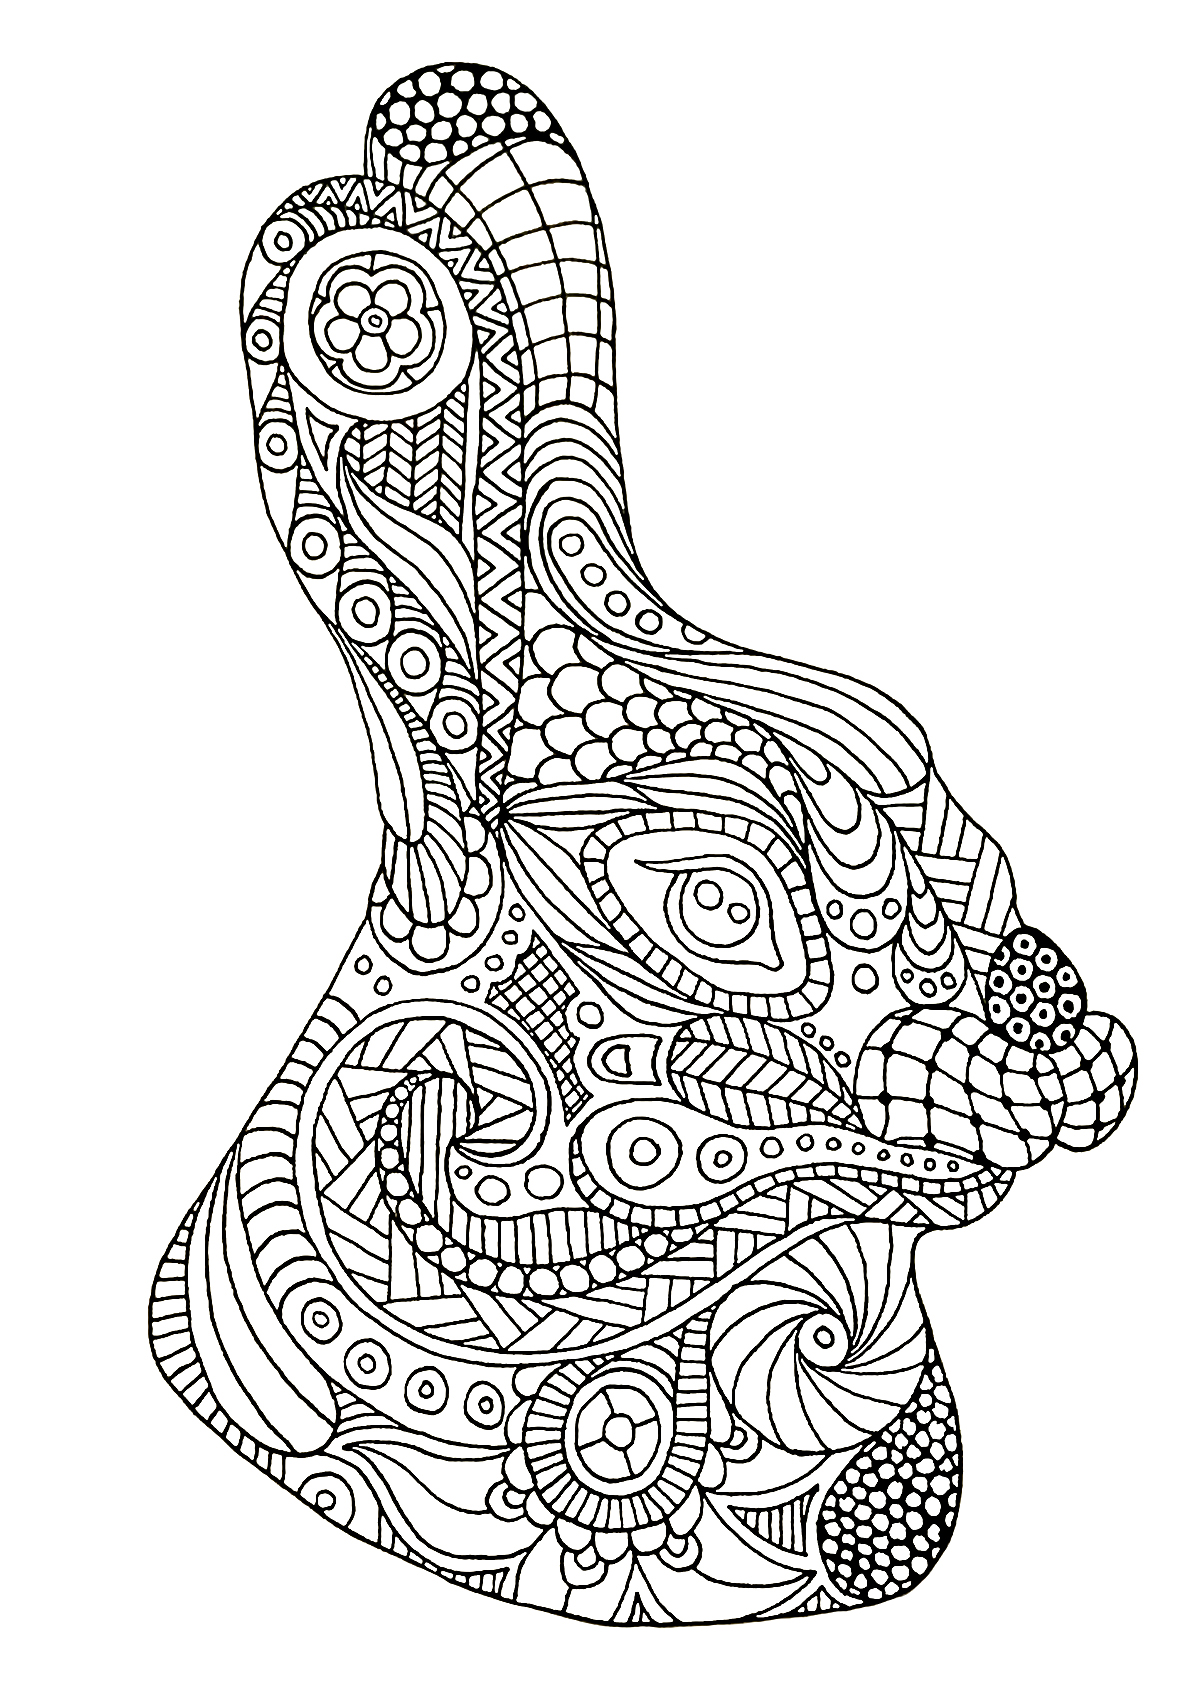 Rabbit head coloring pages (Zentangle)